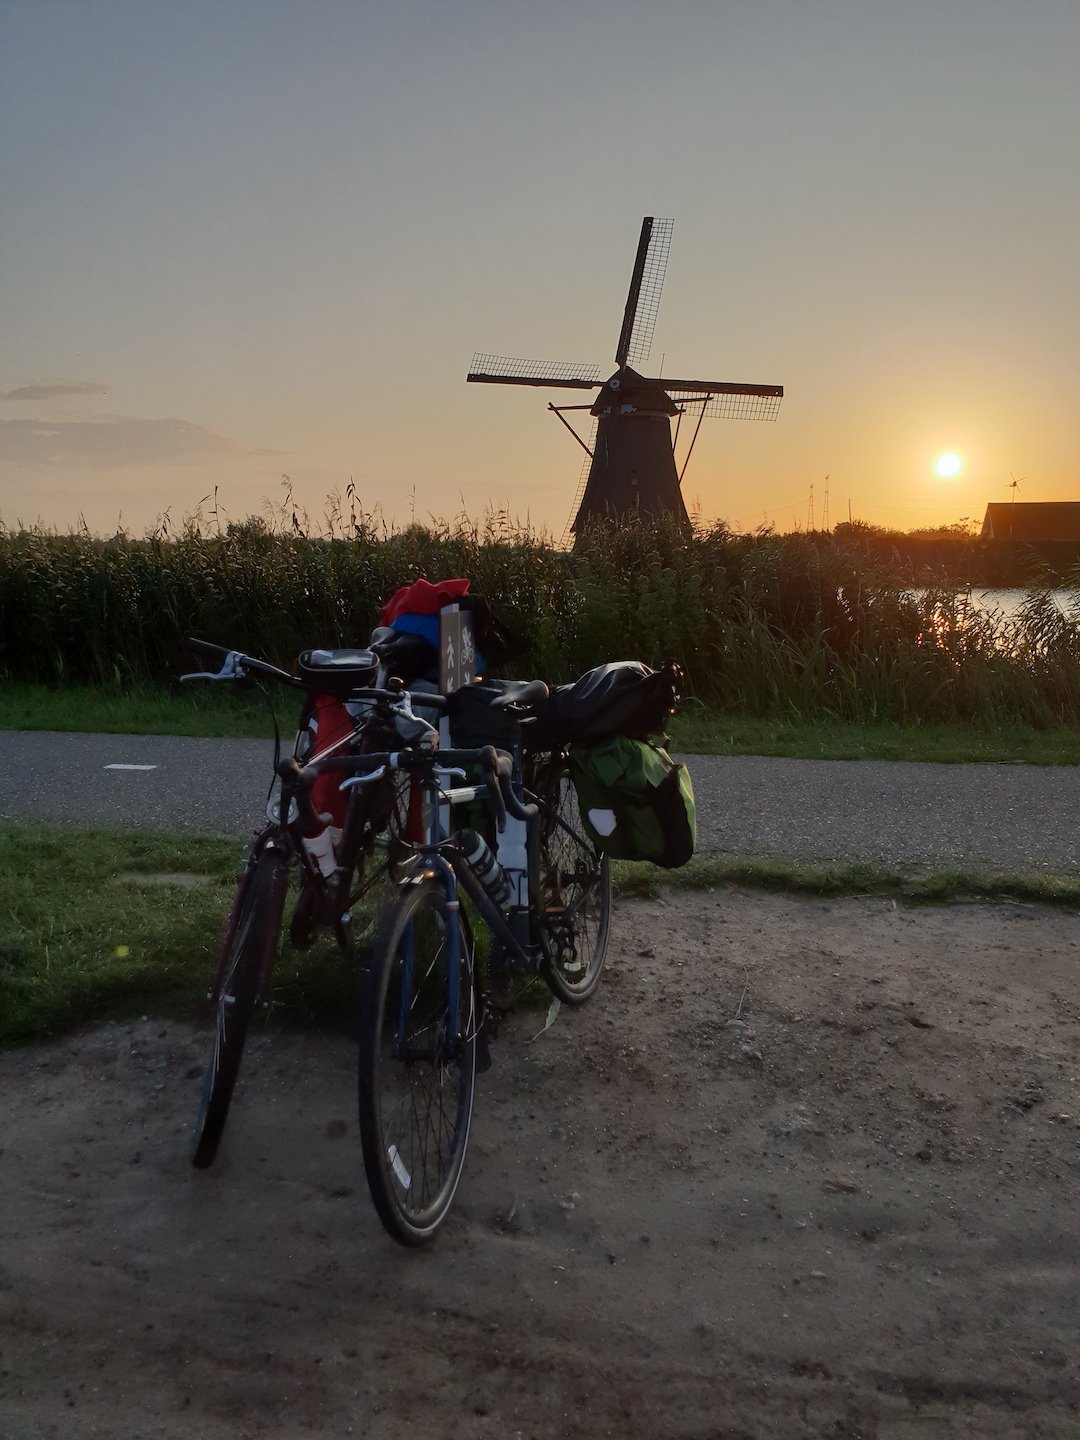 Two bikes, and a windmill at sunset behind.